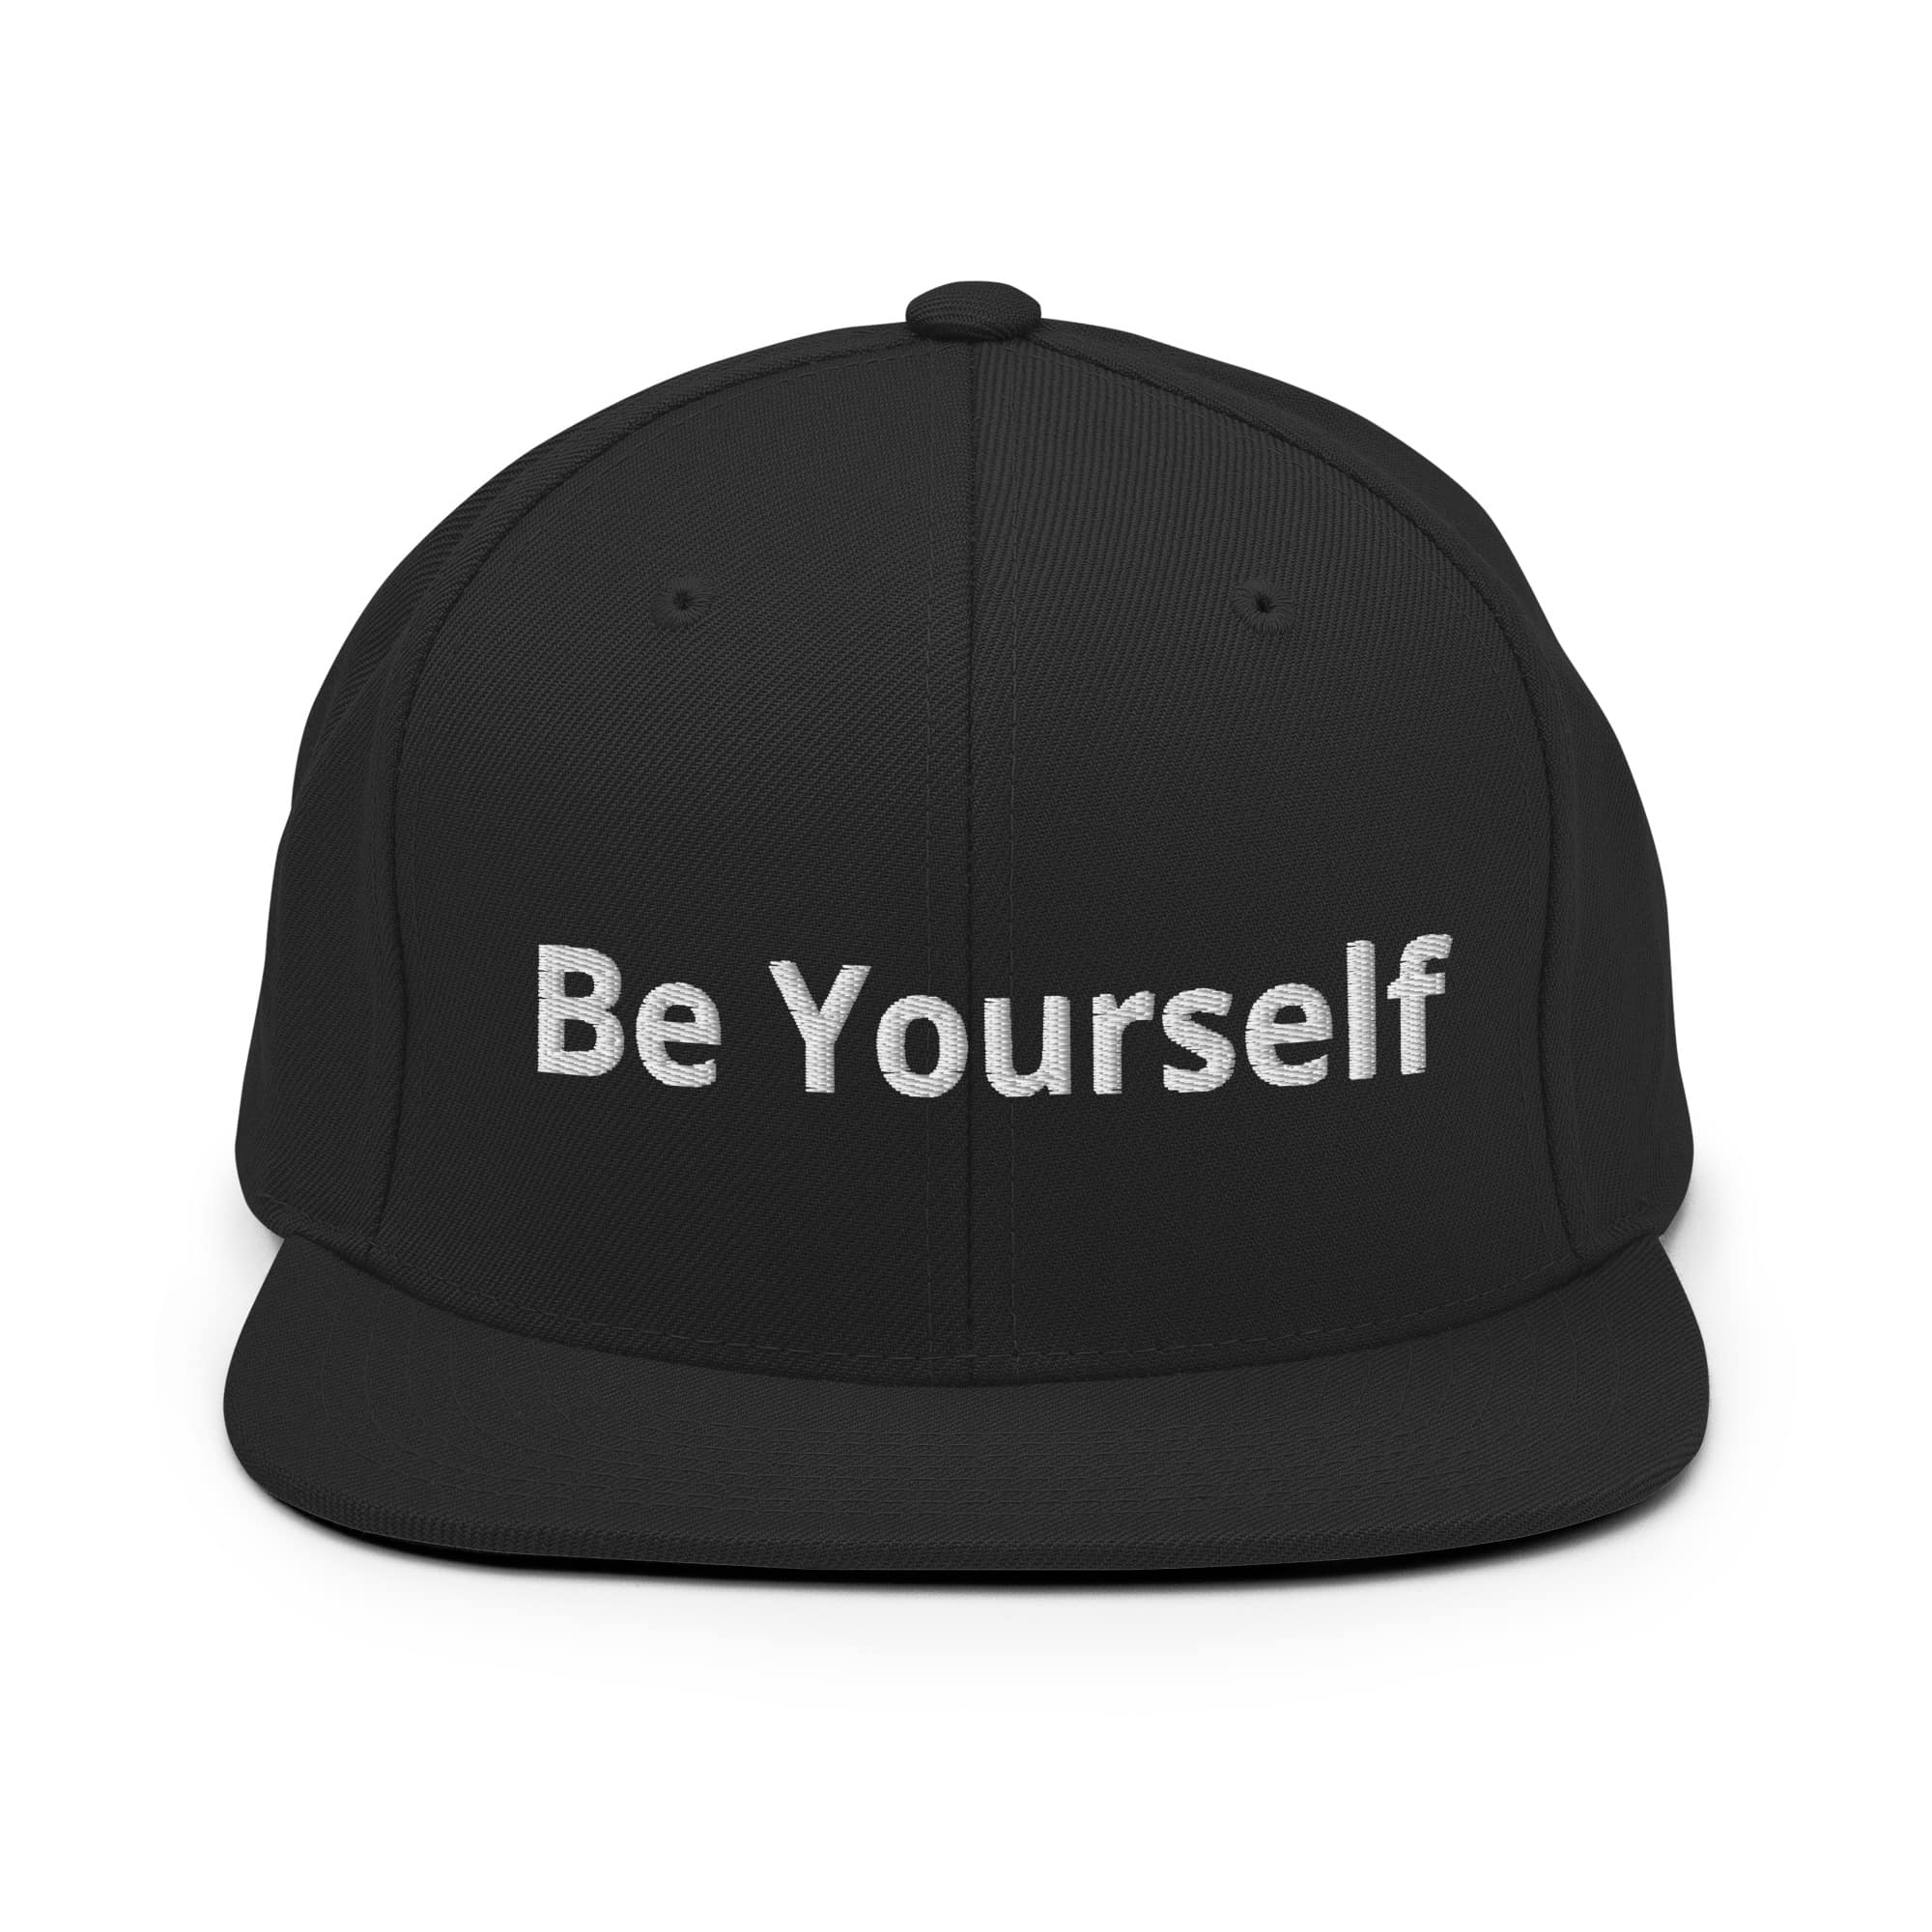 Be Yourself Snapback Hat Video game store Gaming merchandise Gaming accessories shop Online gaming store Video game shop near me Gaming console store PC gaming store Gaming gear shop Retro gaming shop Board game shop Anime merchandise Anime store online Japanese anime shop Anime figurines Manga shop Anime DVDs Anime accessories Anime apparel Anime collectibles Anime gifts